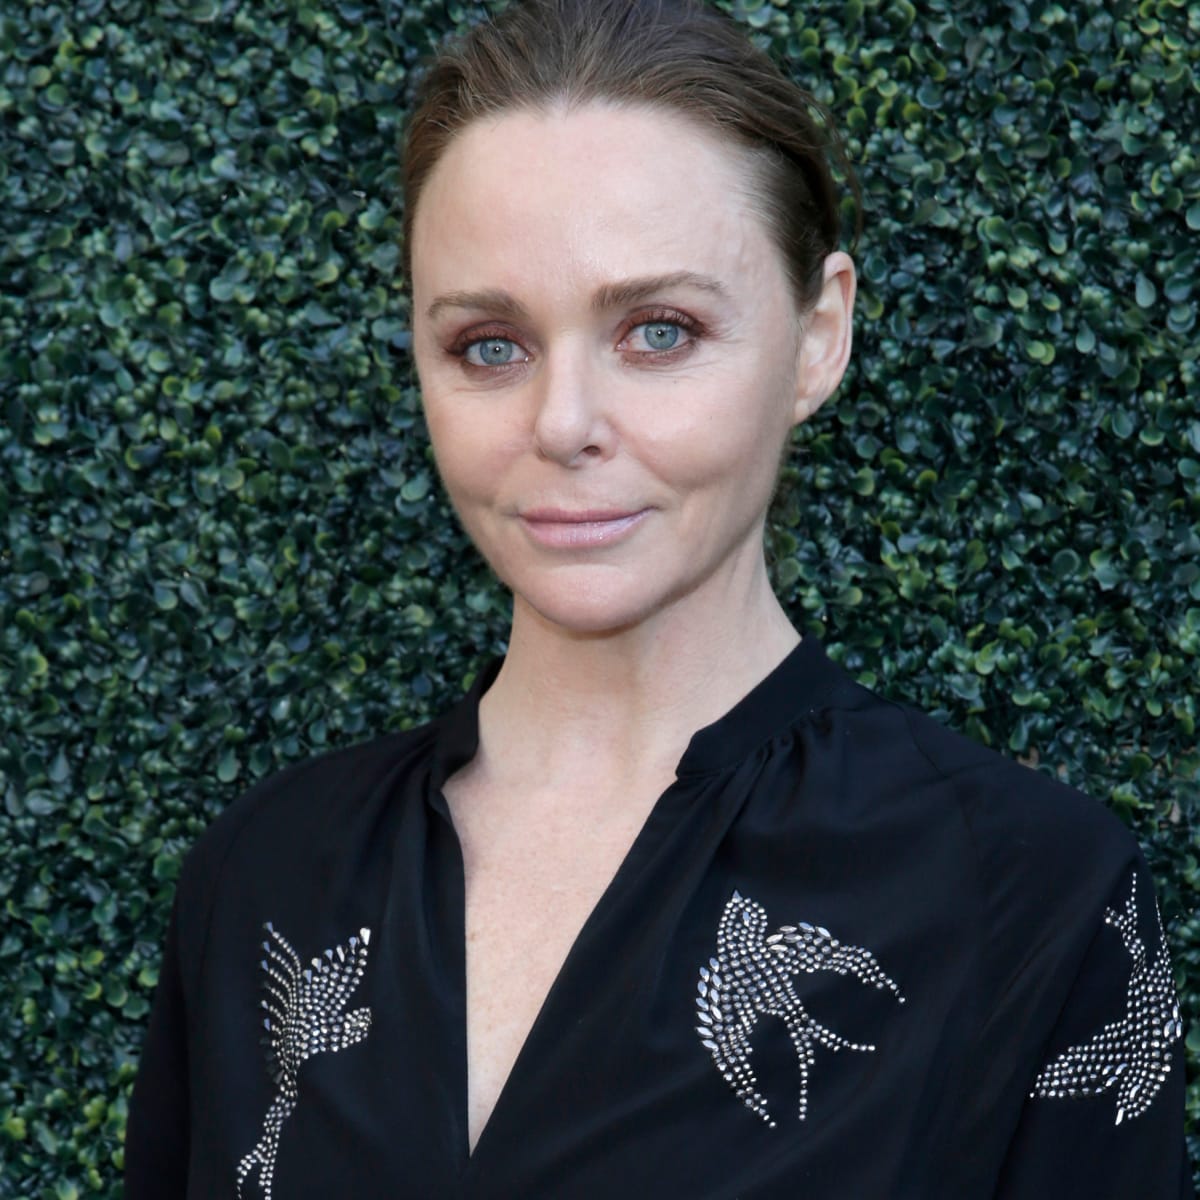 Stella McCartney Signs With LVMH-owned Thélios for Eyewear